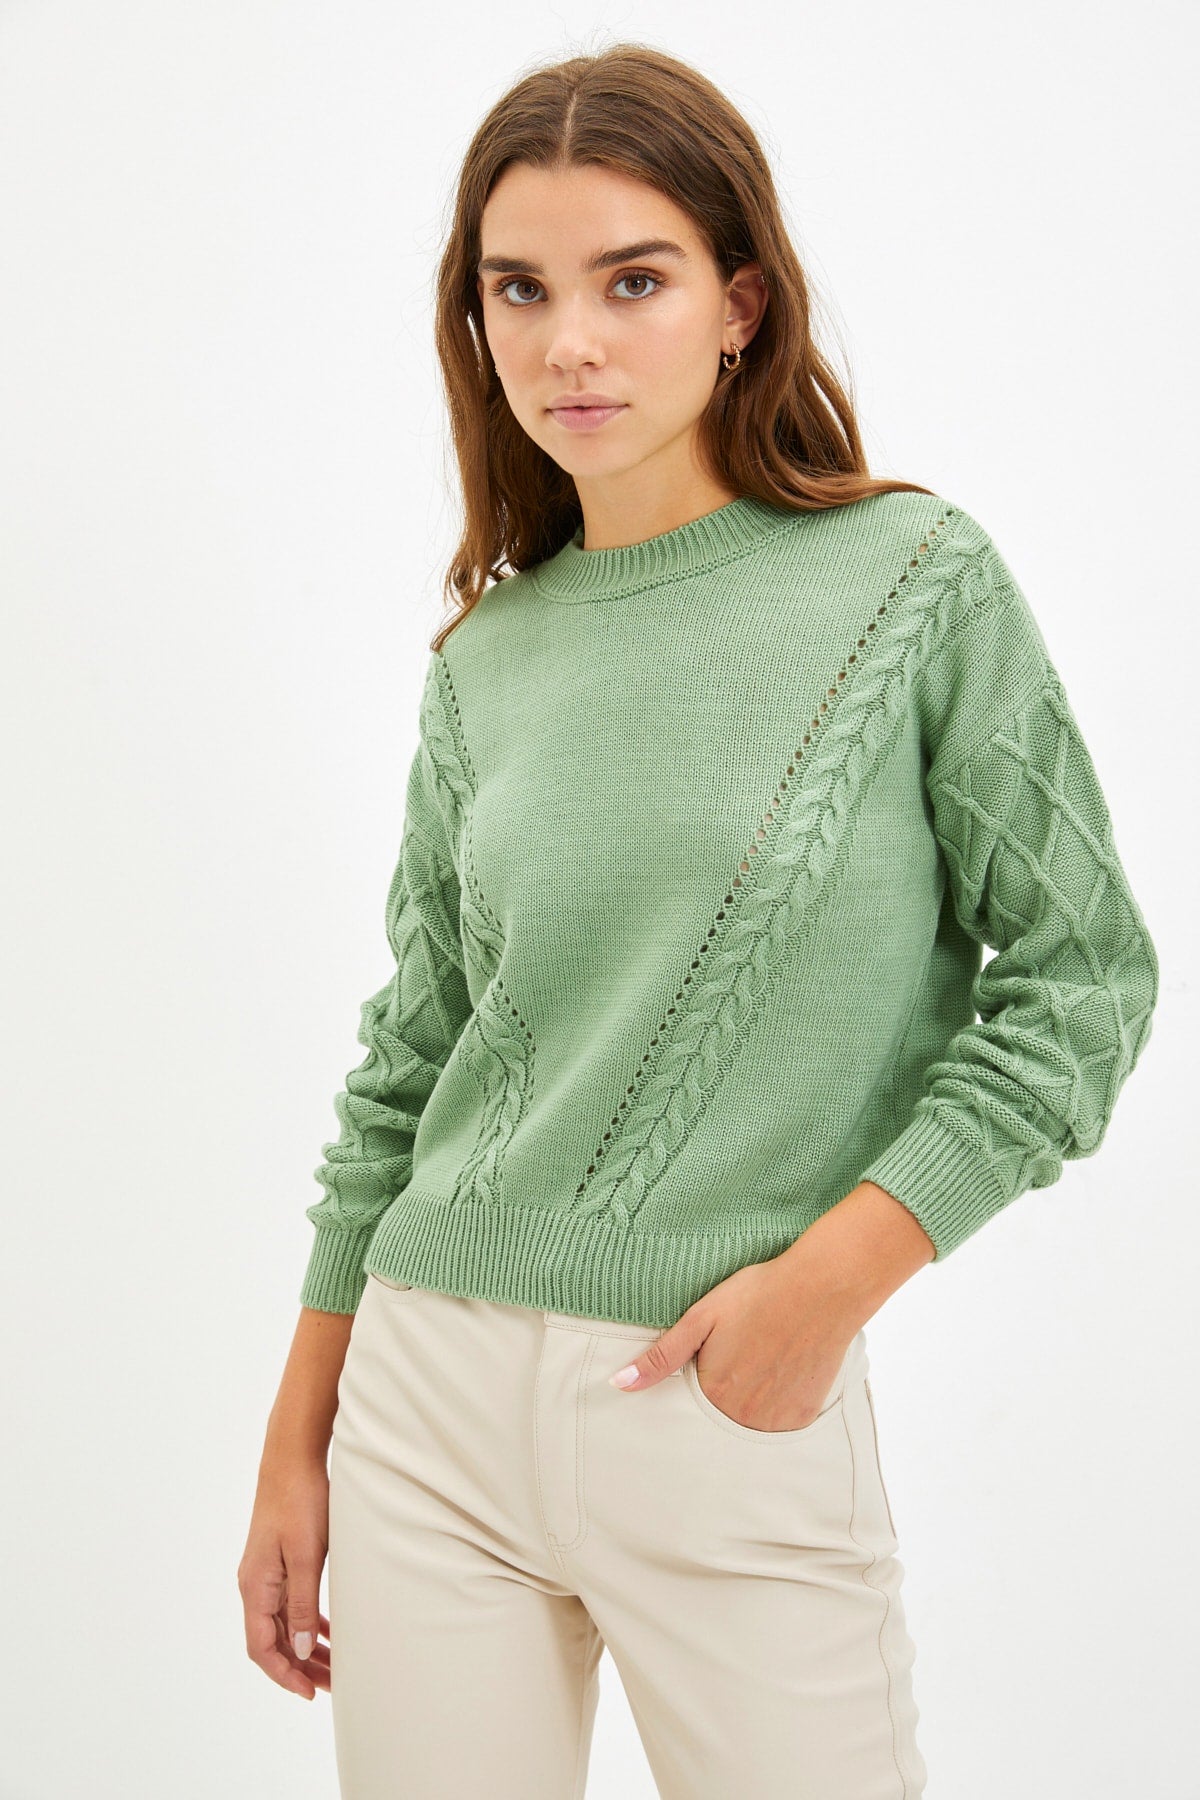 Round Neck Woven Knitted Sweater in Cream, Rose and Mint